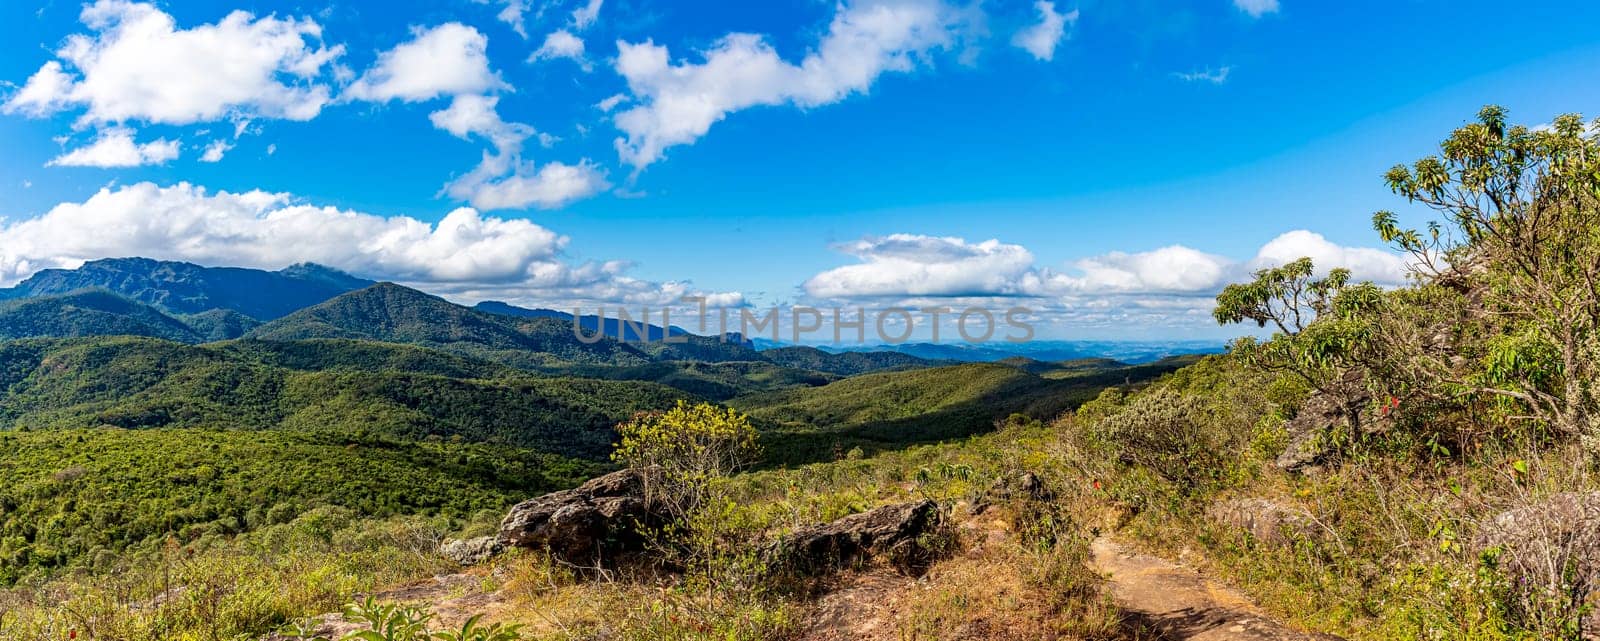 Panoramic image of the mountain ranges by Fred_Pinheiro